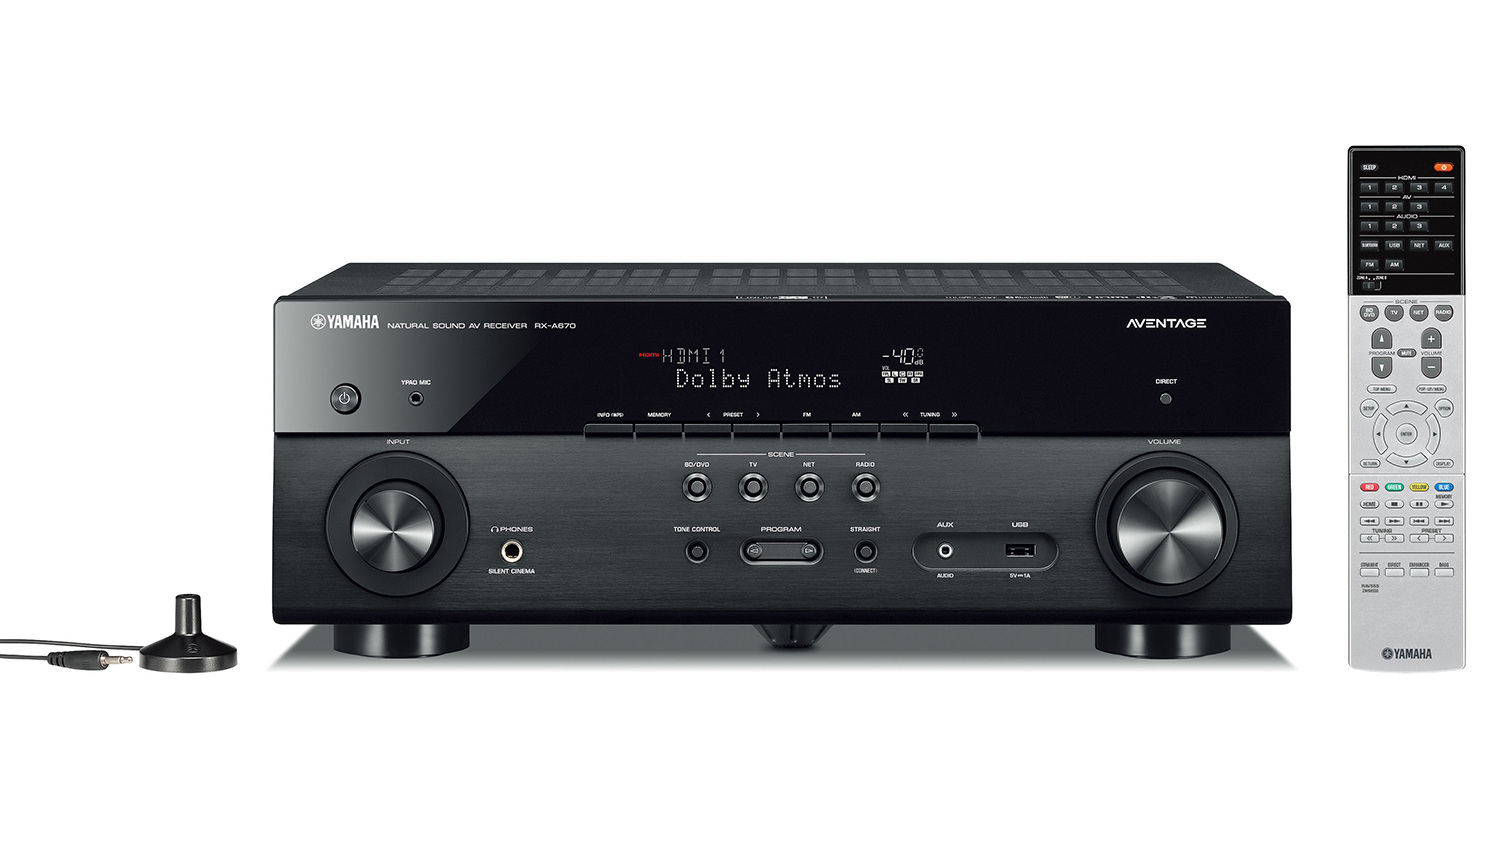 yamaha aventage rx a 70 series receivers 2017 pricing availability rxa670blfruc f